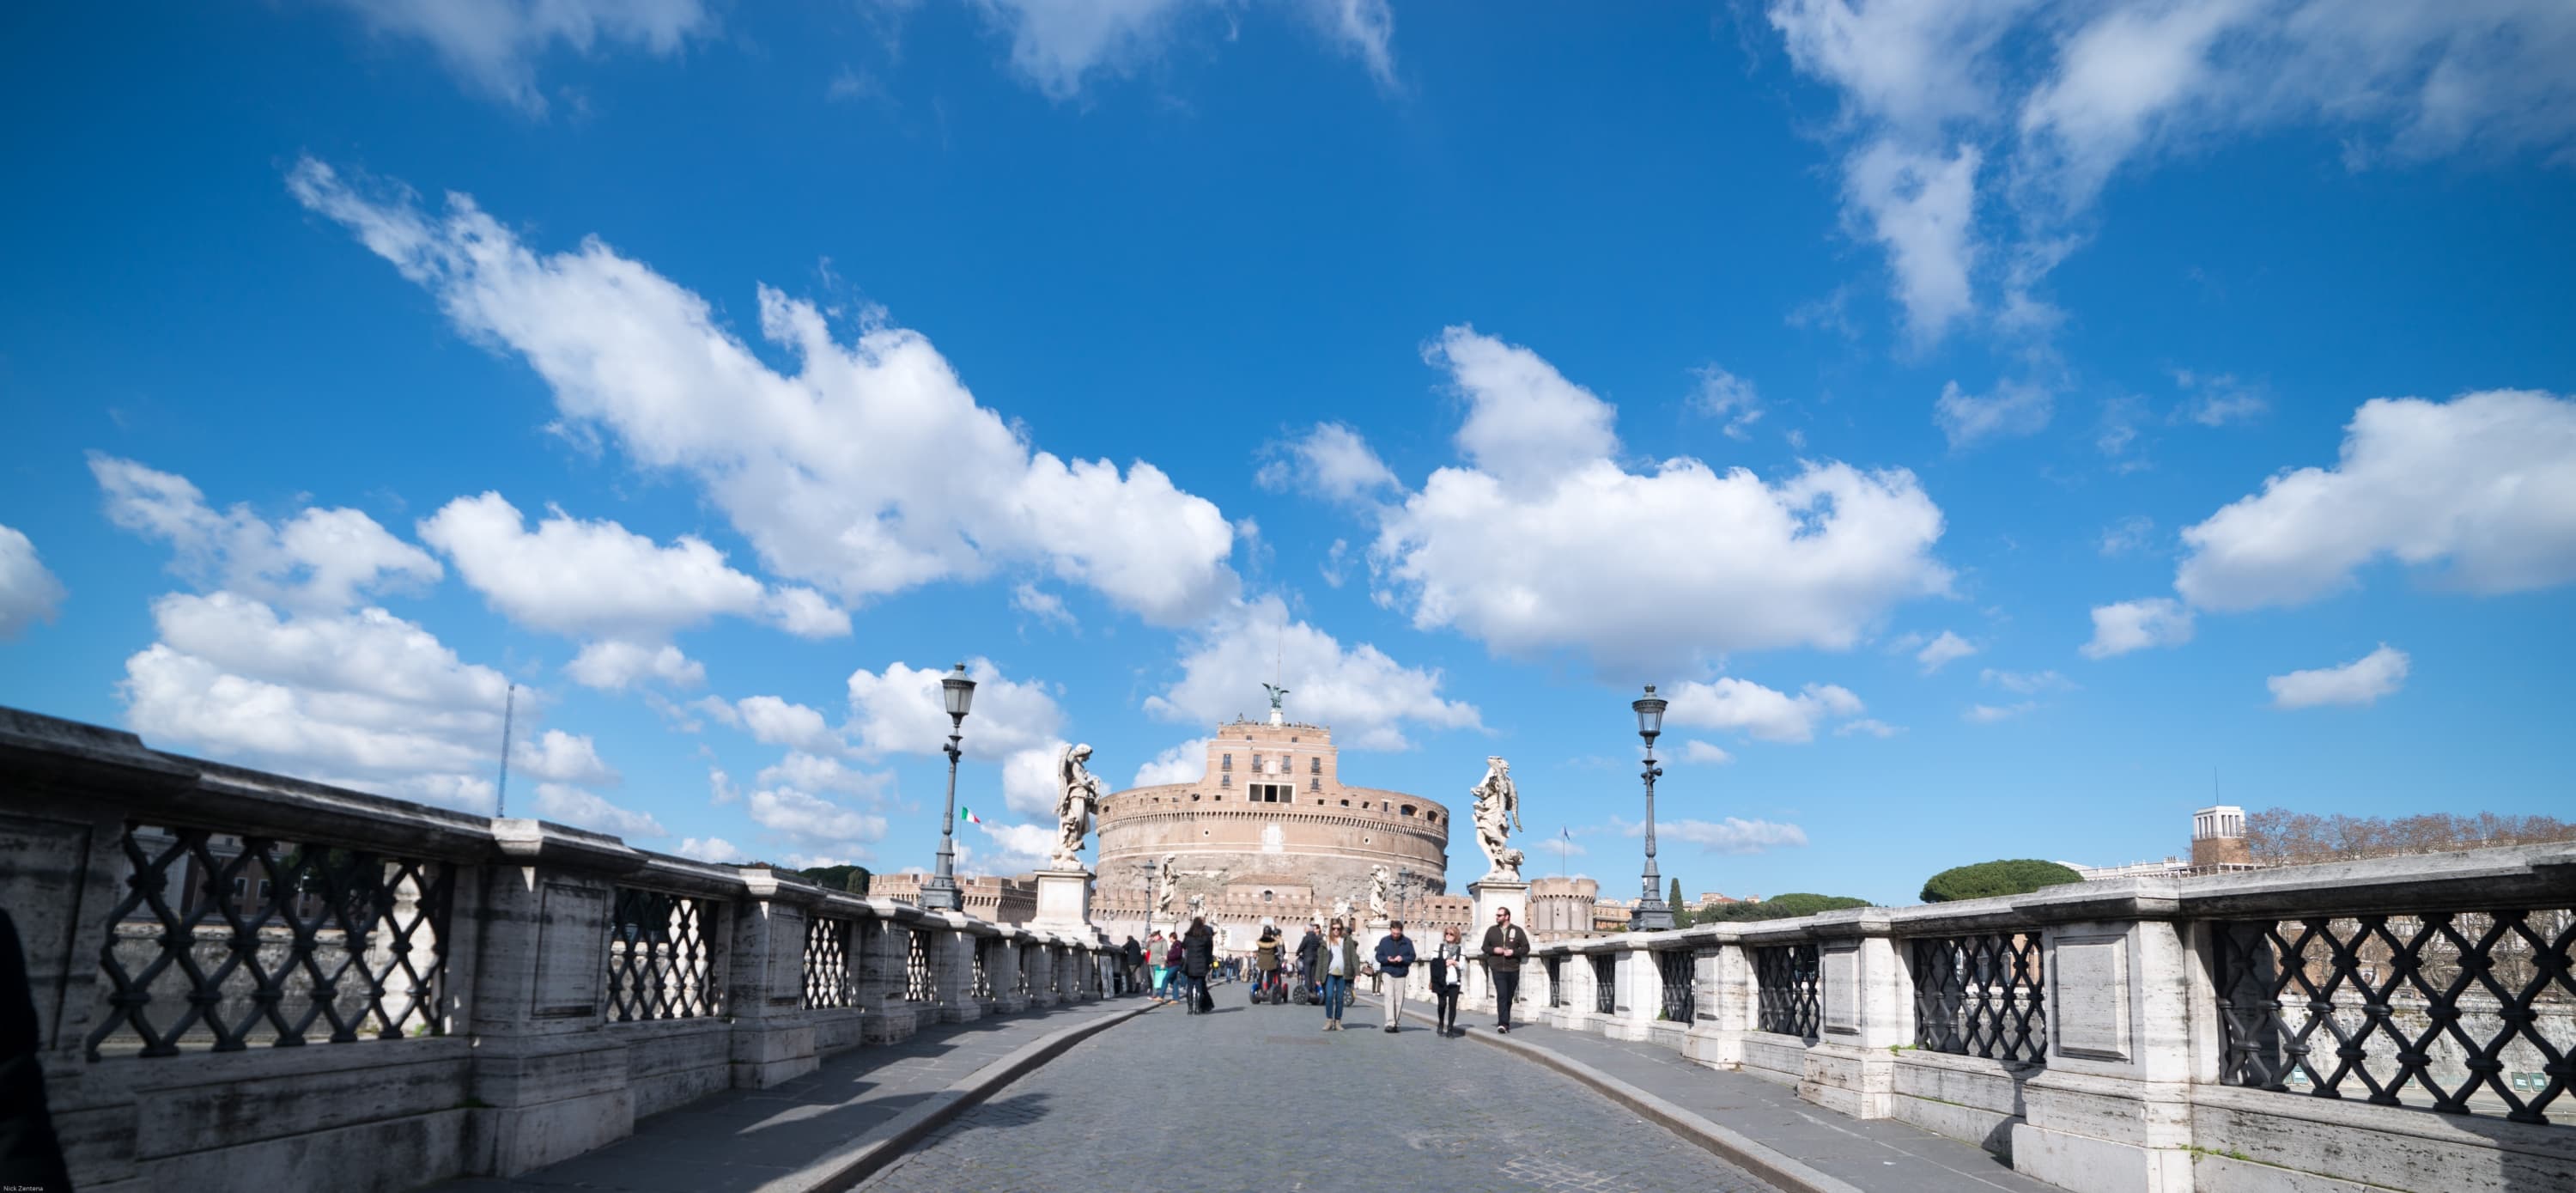 Sky and cloud view over Castel Sant'Angelo